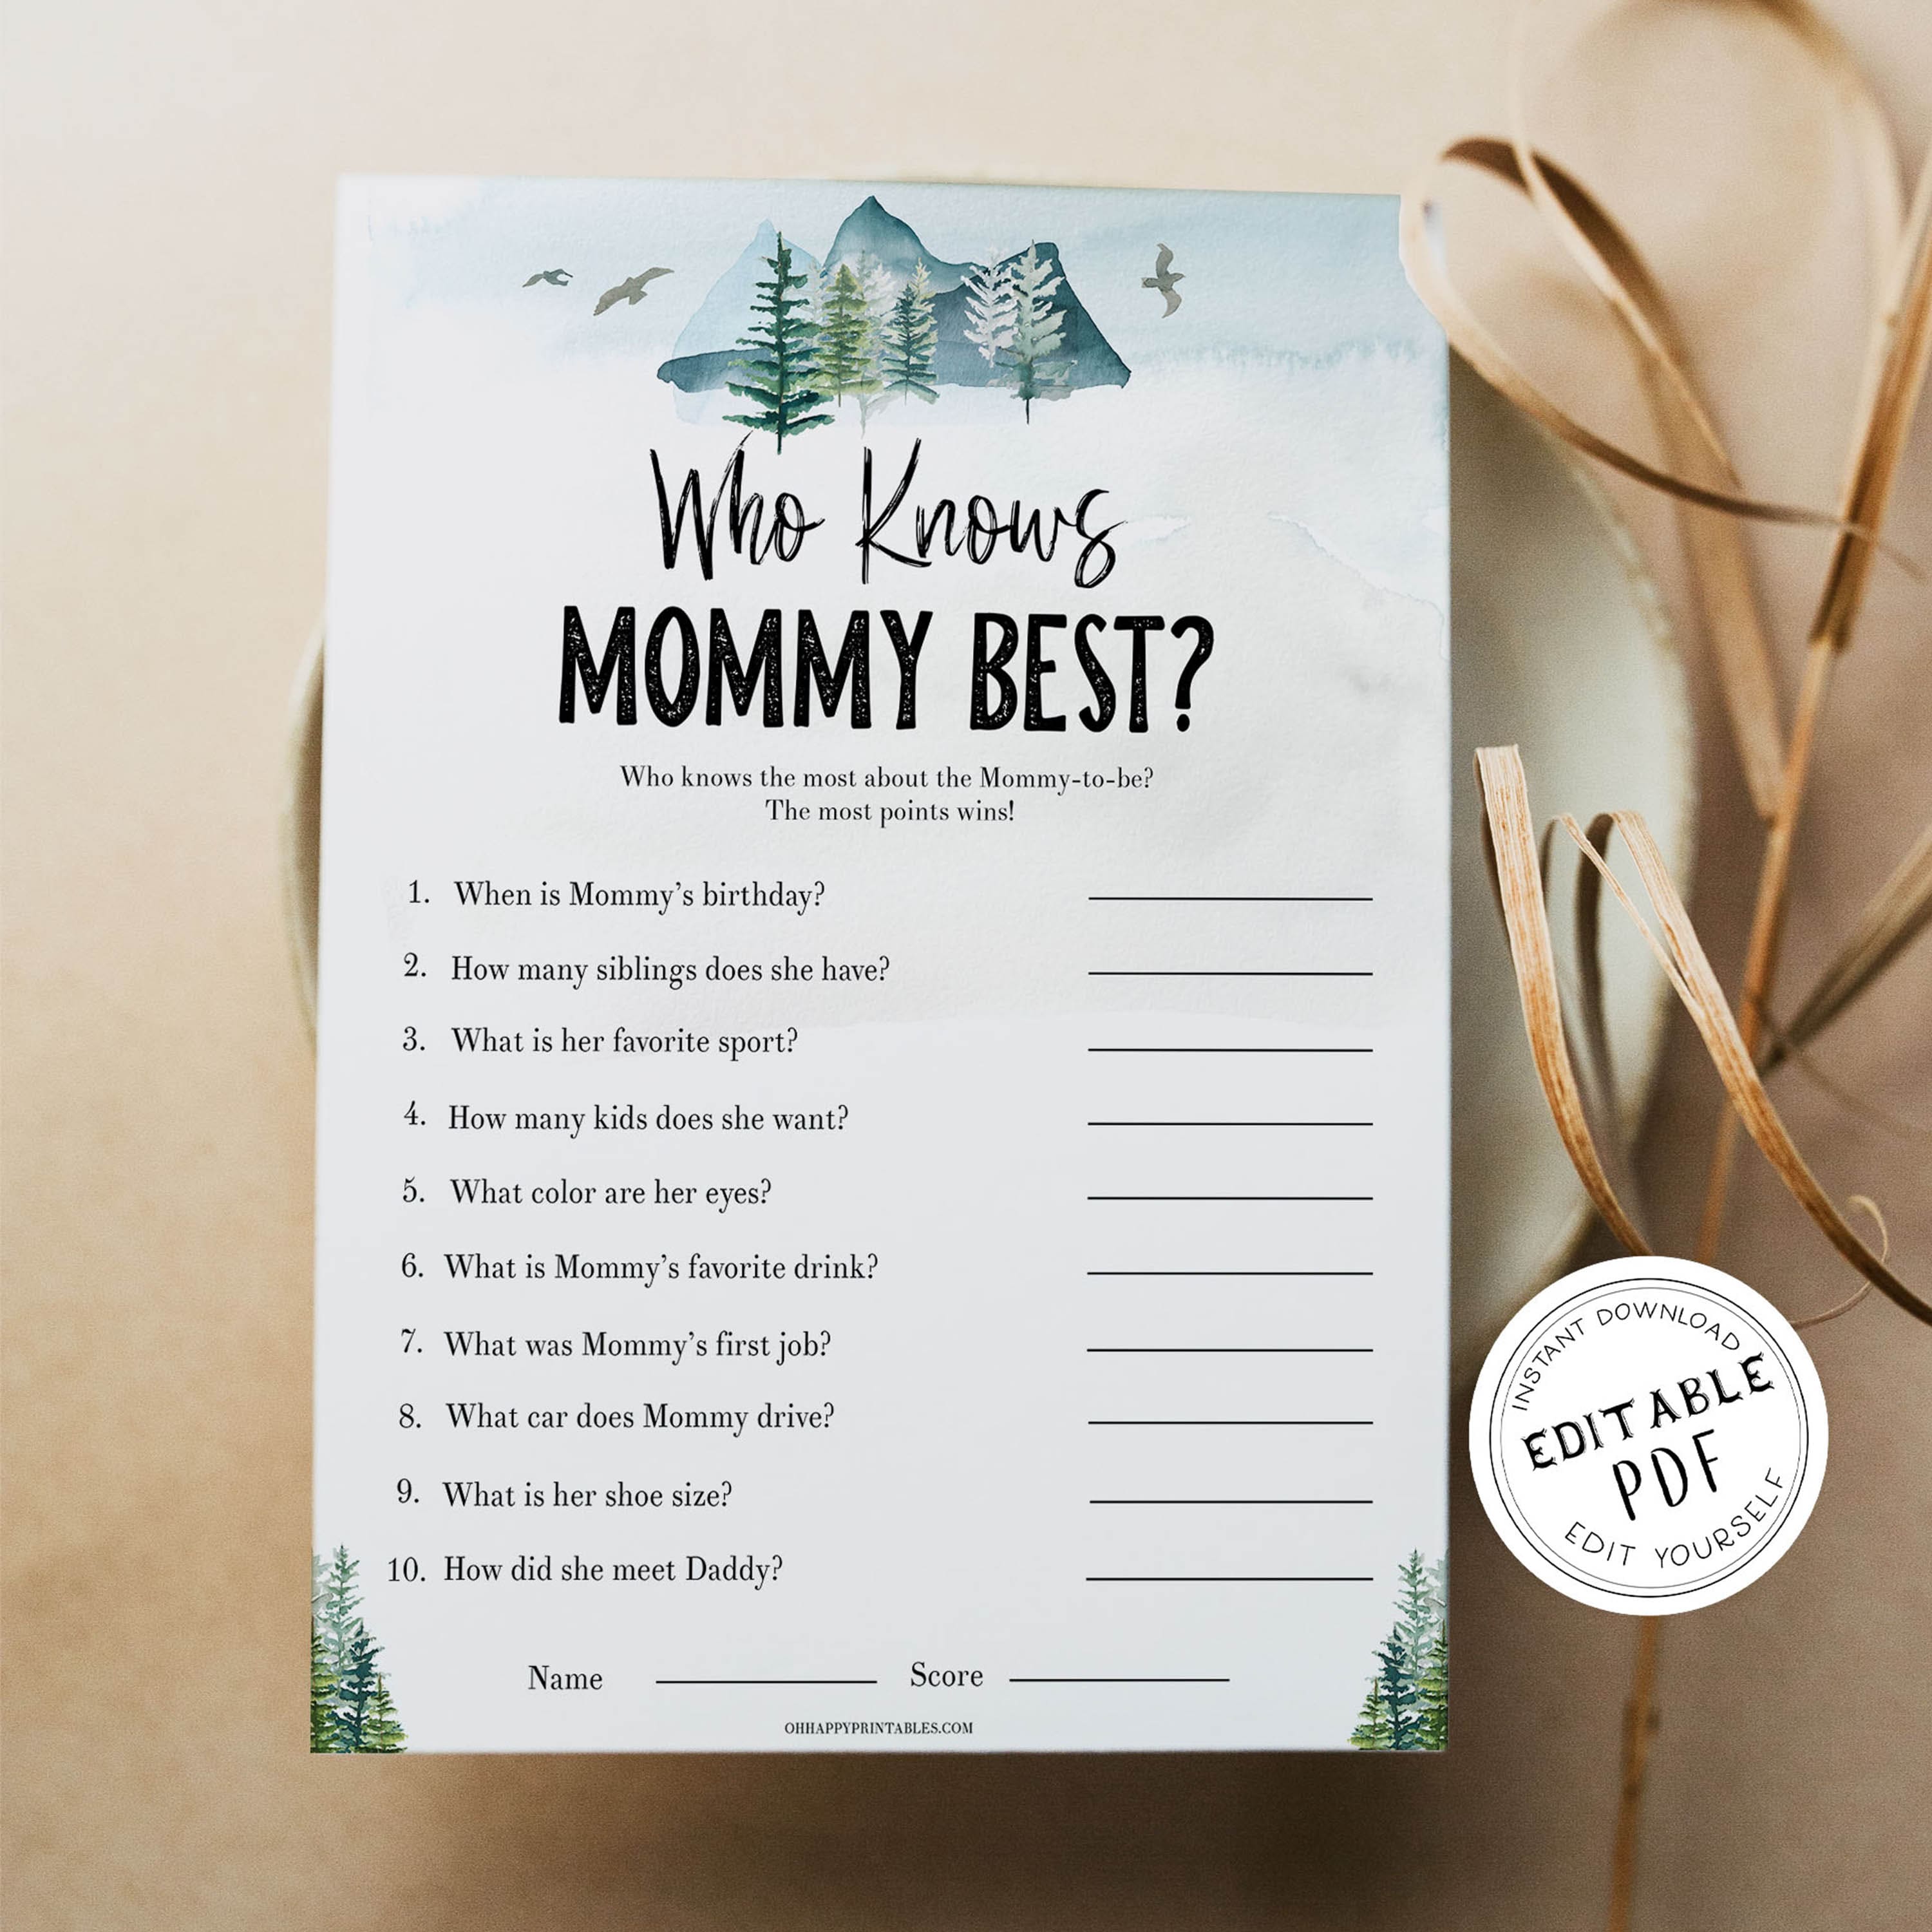 editable who knows mommy best game, Printable baby shower games, adventure awaits baby games, baby shower games, fun baby shower ideas, top baby shower ideas, adventure awaits baby shower, baby shower games, fun adventure baby shower ideas